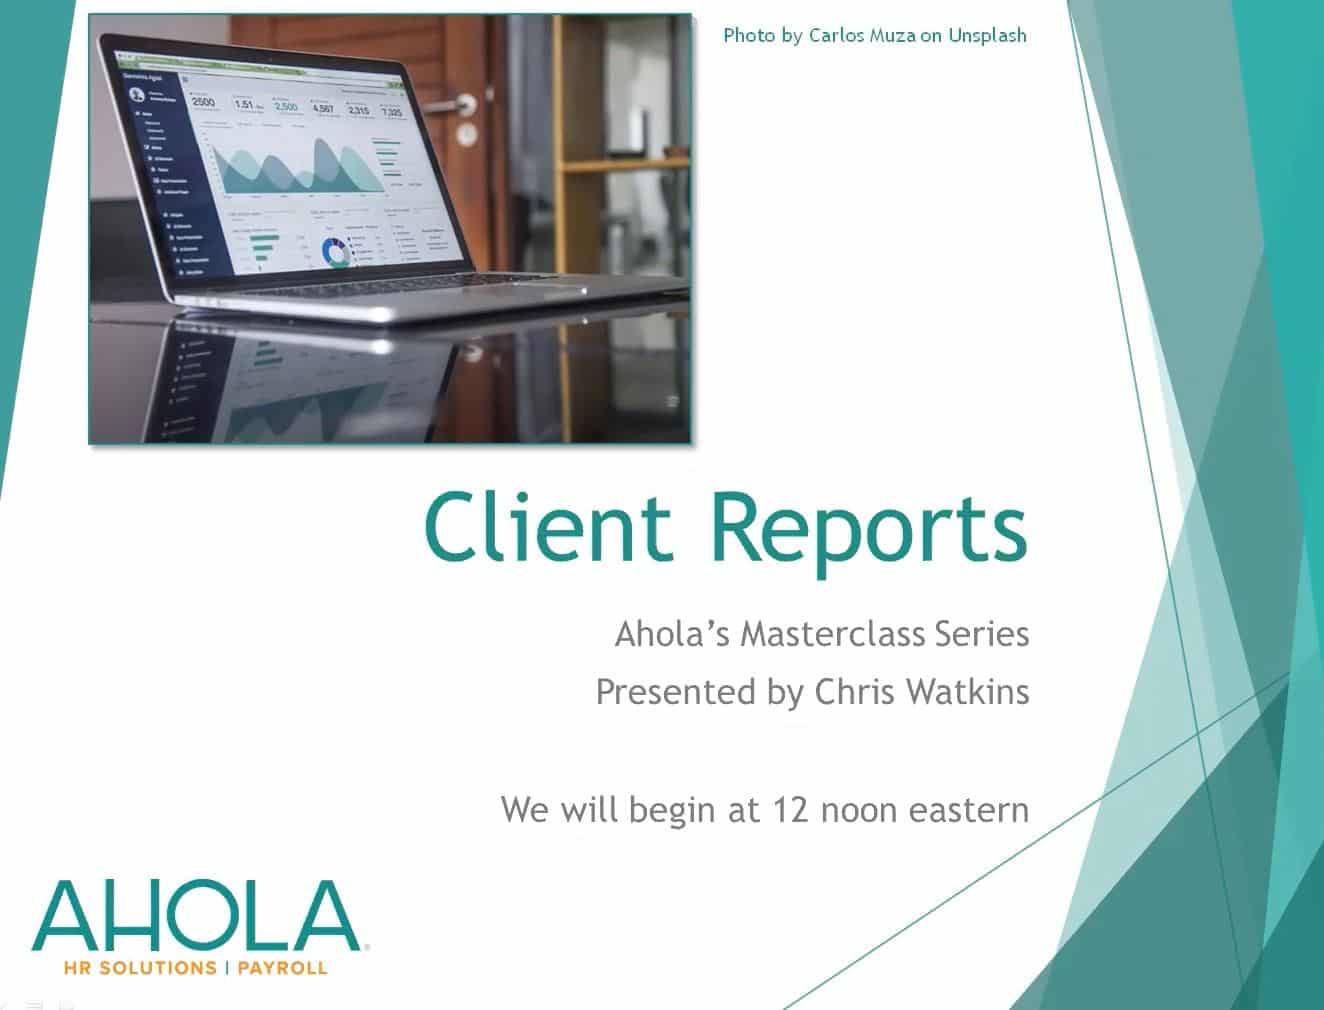 Ahola's Masterclass Series: Client Reports